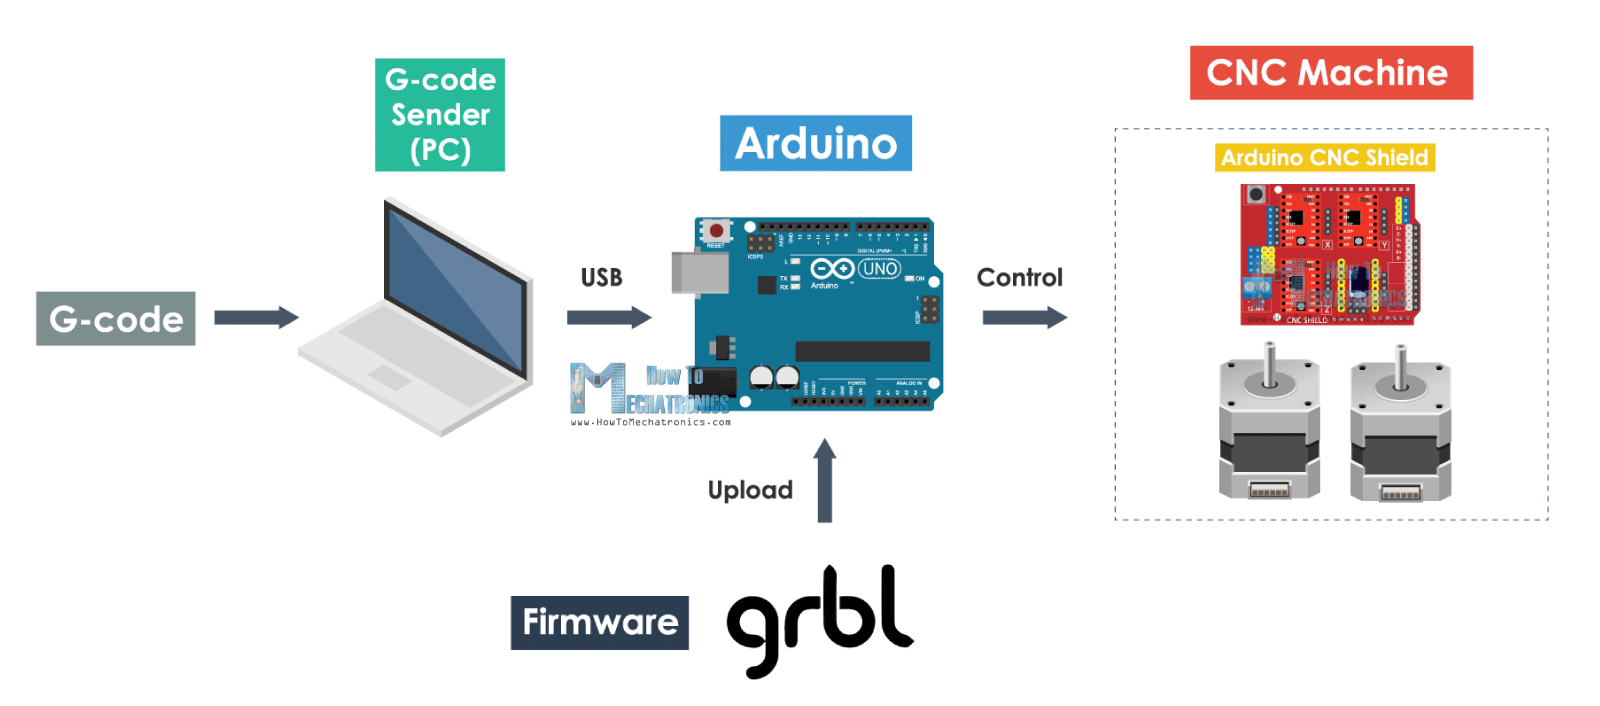 How Arduino based CNC machines work - block diagram - GRBL Firmware and Control software